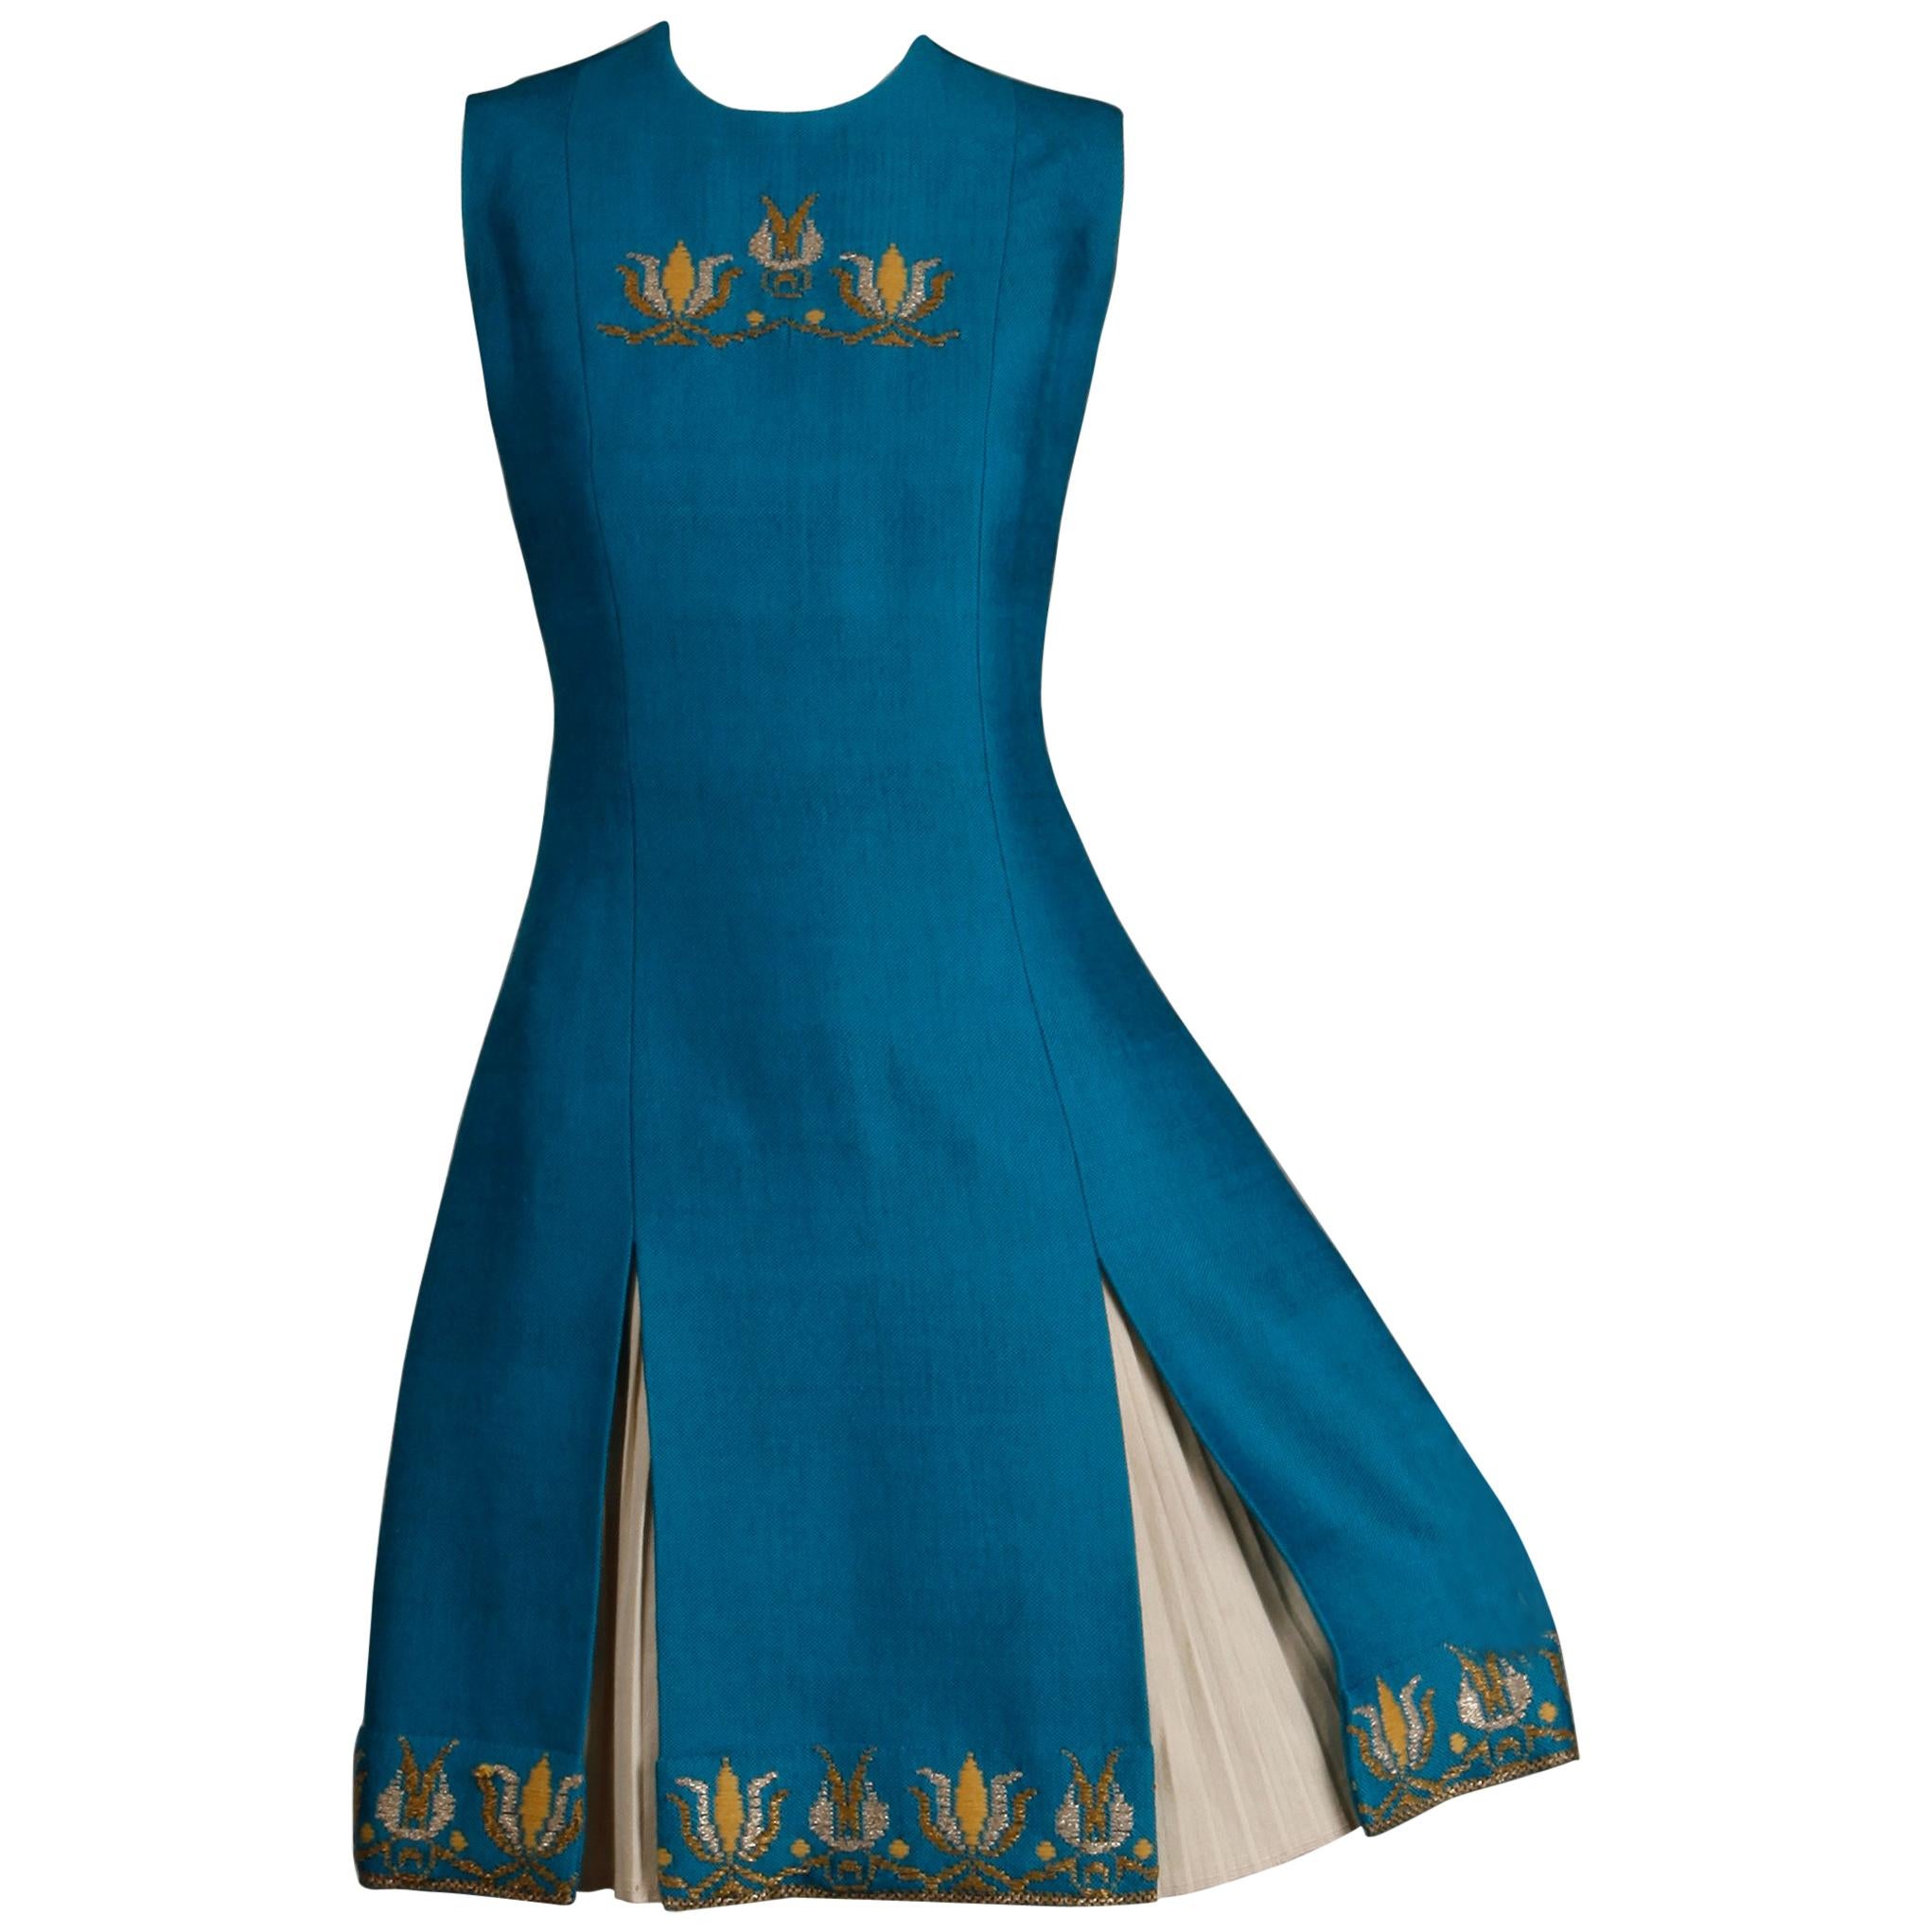 Rare 1960s Nikos-Takis Vintage Blue Shift Dress with Hand Embroidered Tulips For Sale